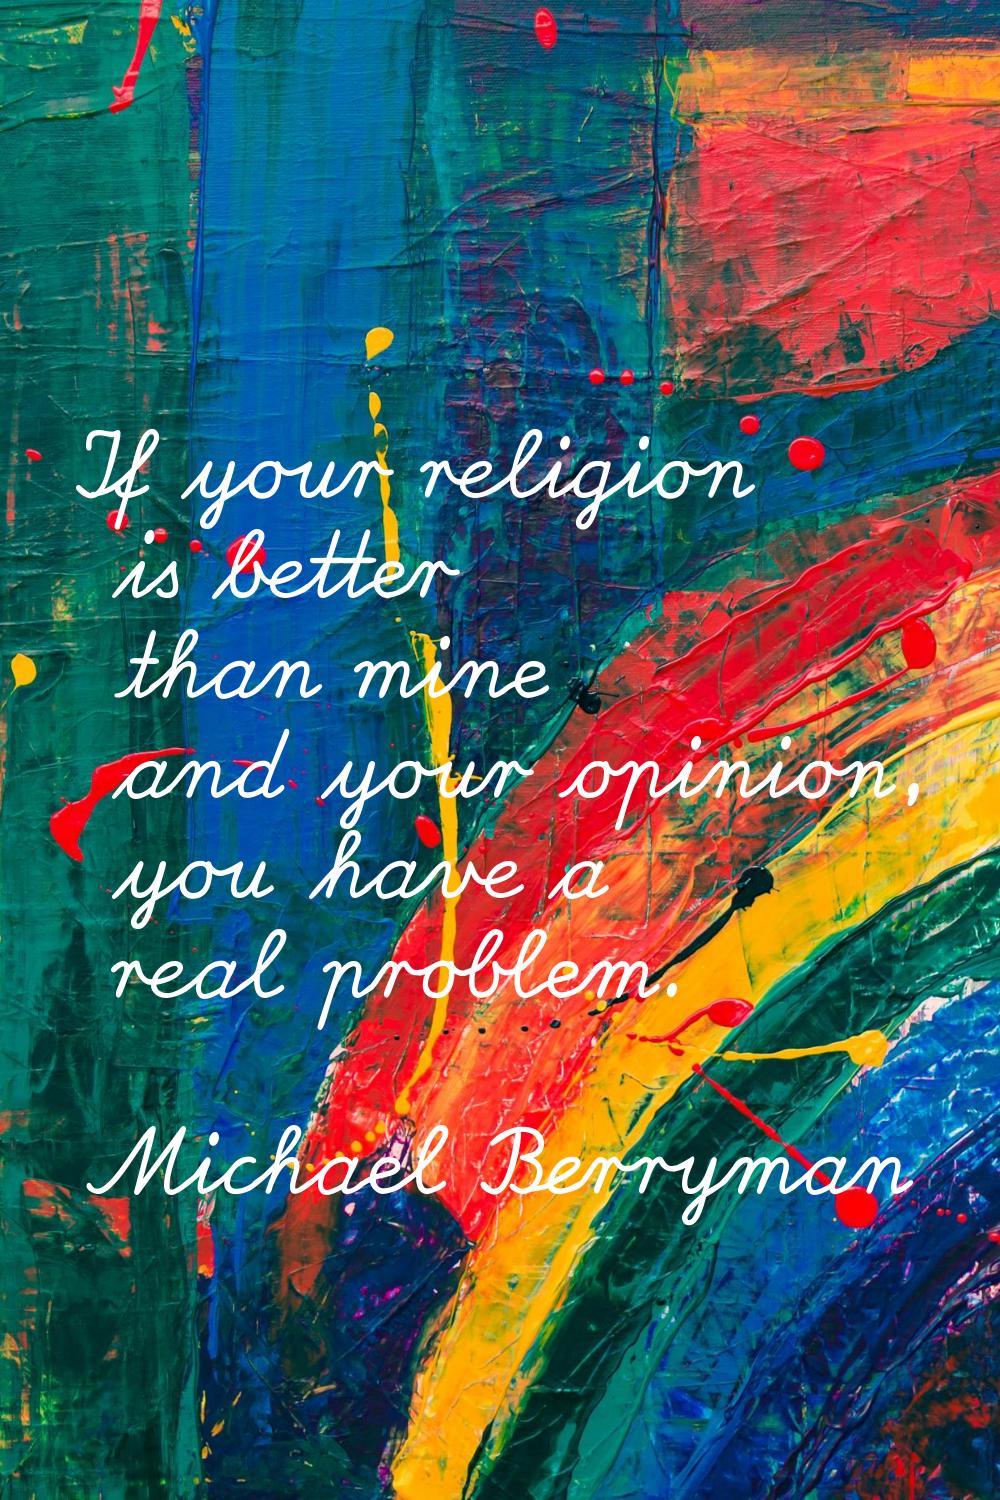 If your religion is better than mine and your opinion, you have a real problem.